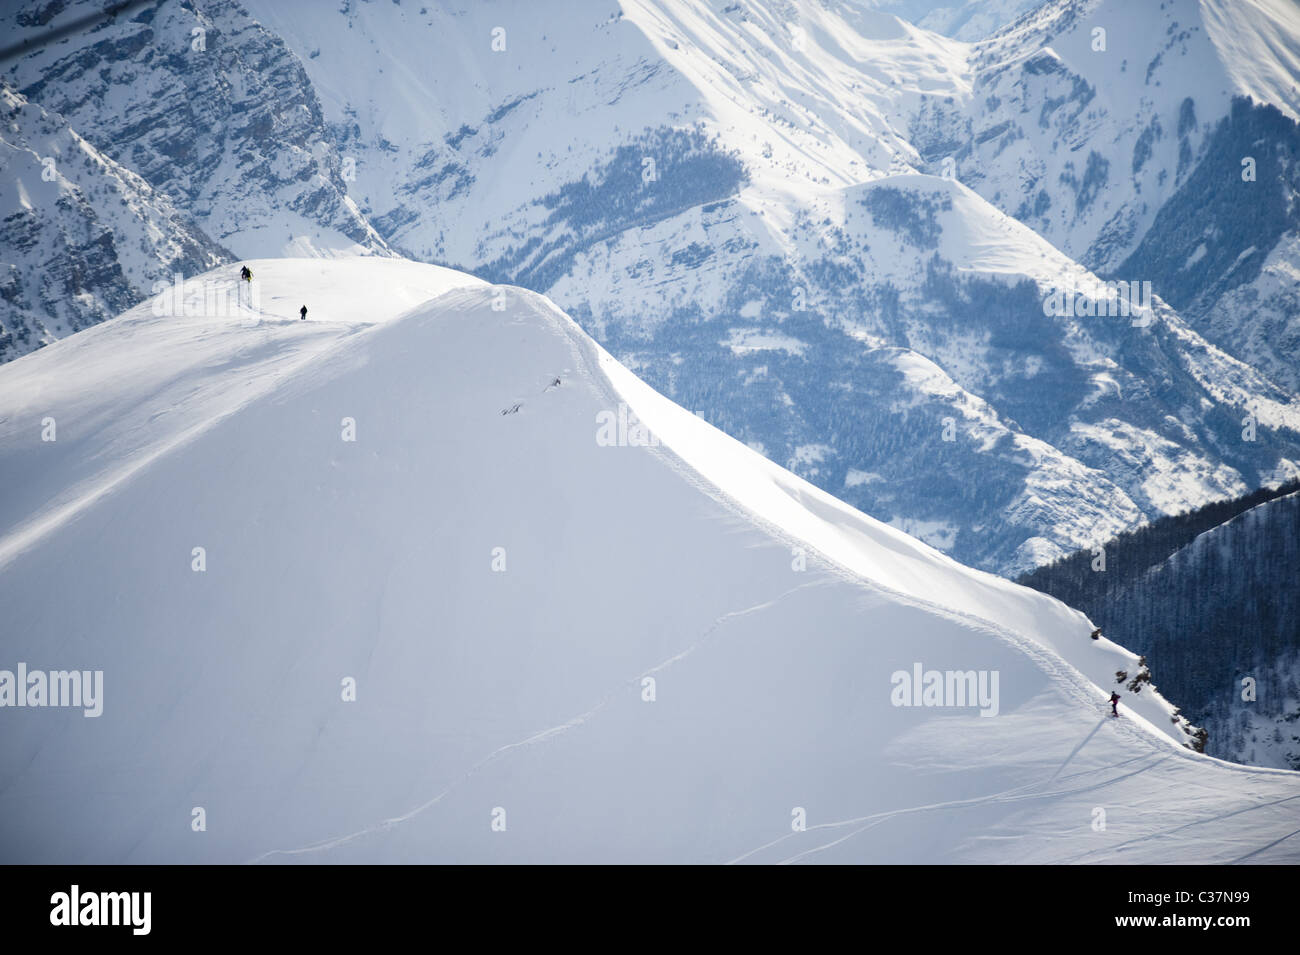 A group of skiers and snowboarders walking along a snowy ridge in Argentera, Italy. Stock Photo